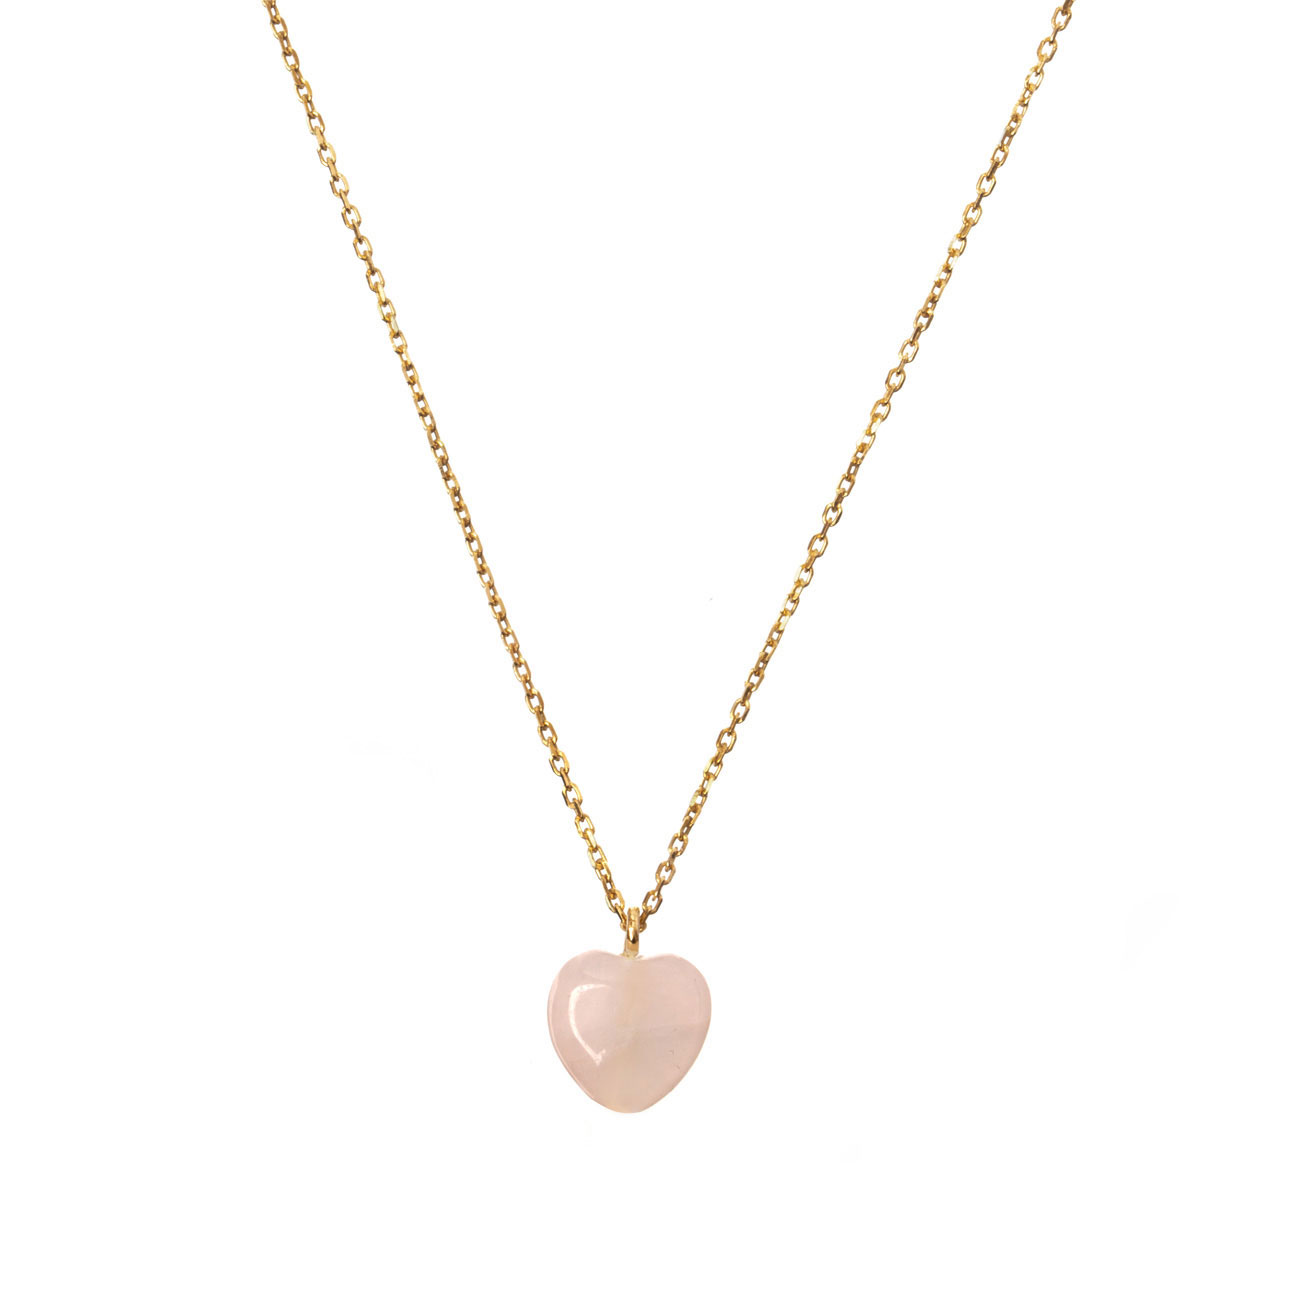 GUILTY PLEASURES SMALL GOLD HEART NECKLACE